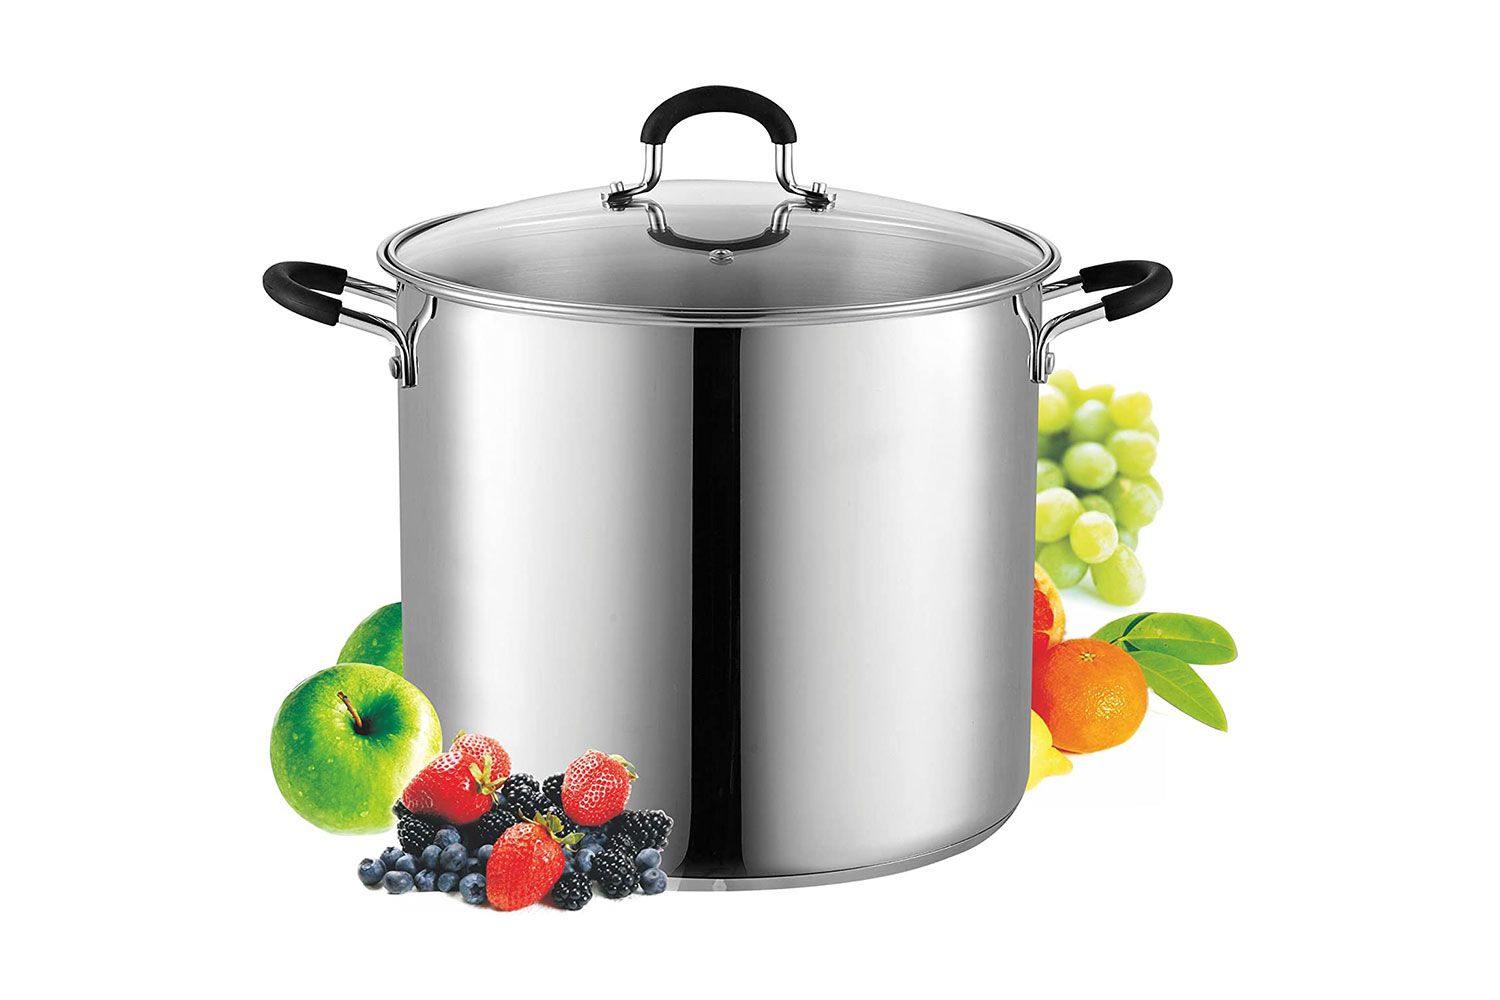 Cook-n-home-12-quart-stainless-steel-stockpot-with-lid